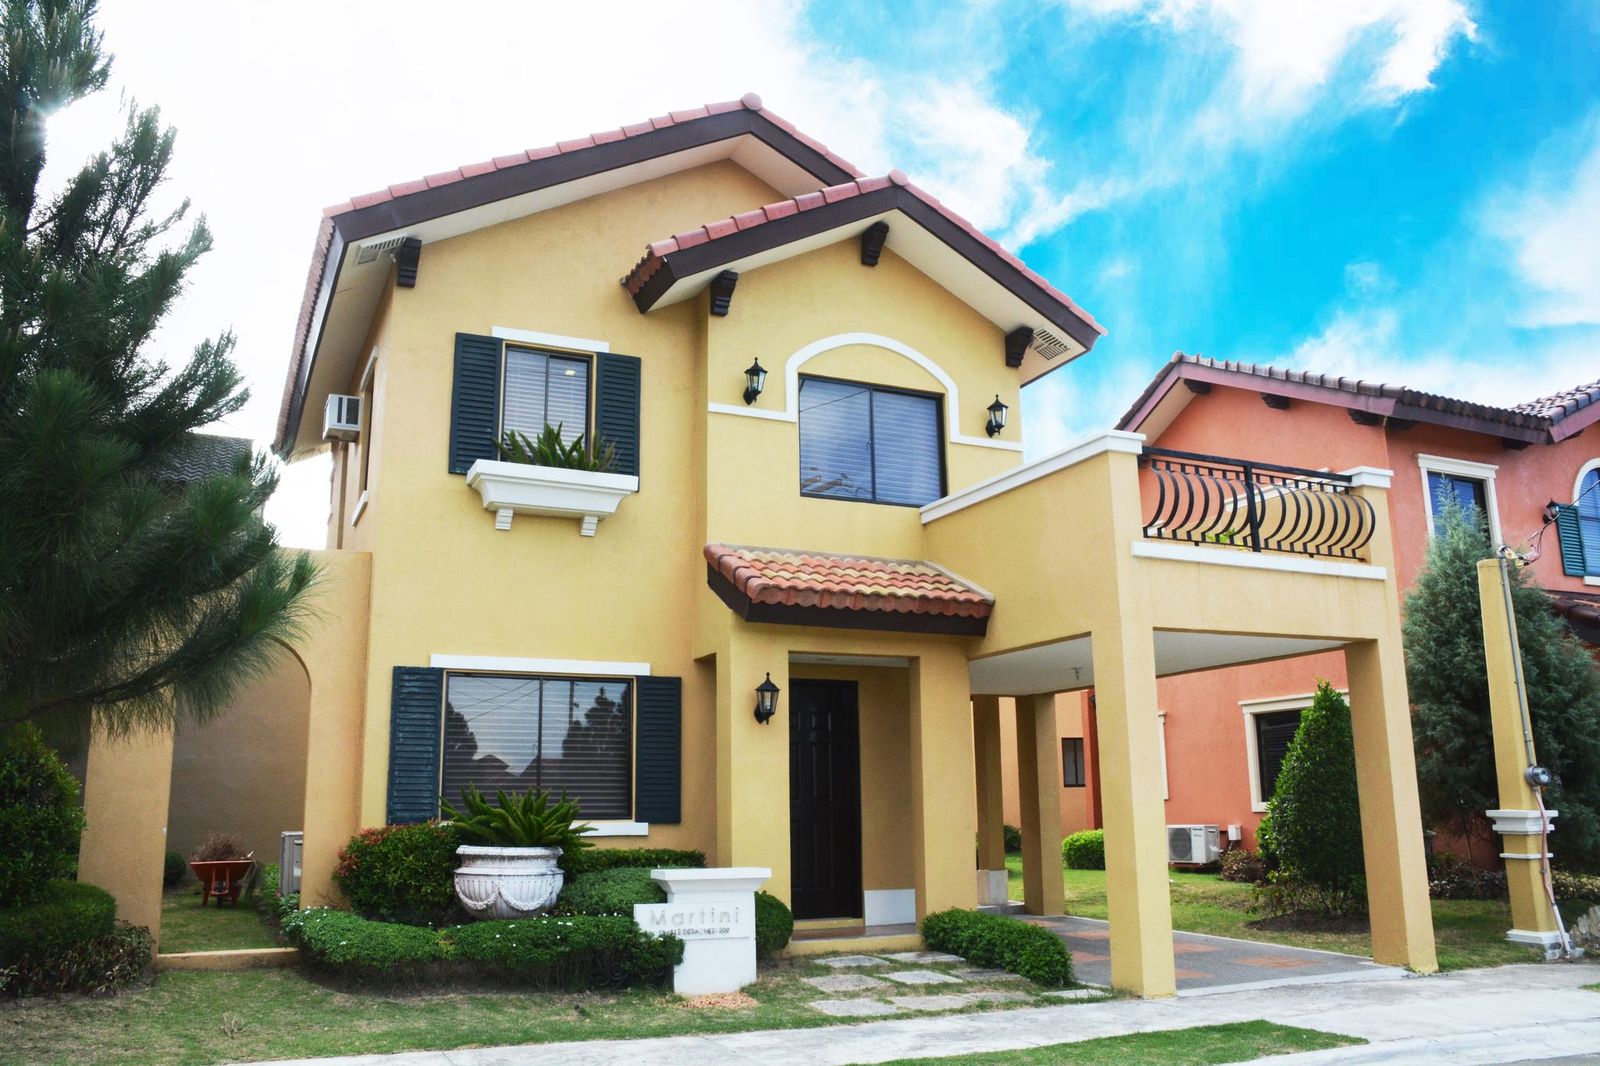 MARTINI | HOUSE AND LOT FOR SALE IN VITTORIA BY CROWN ASIA